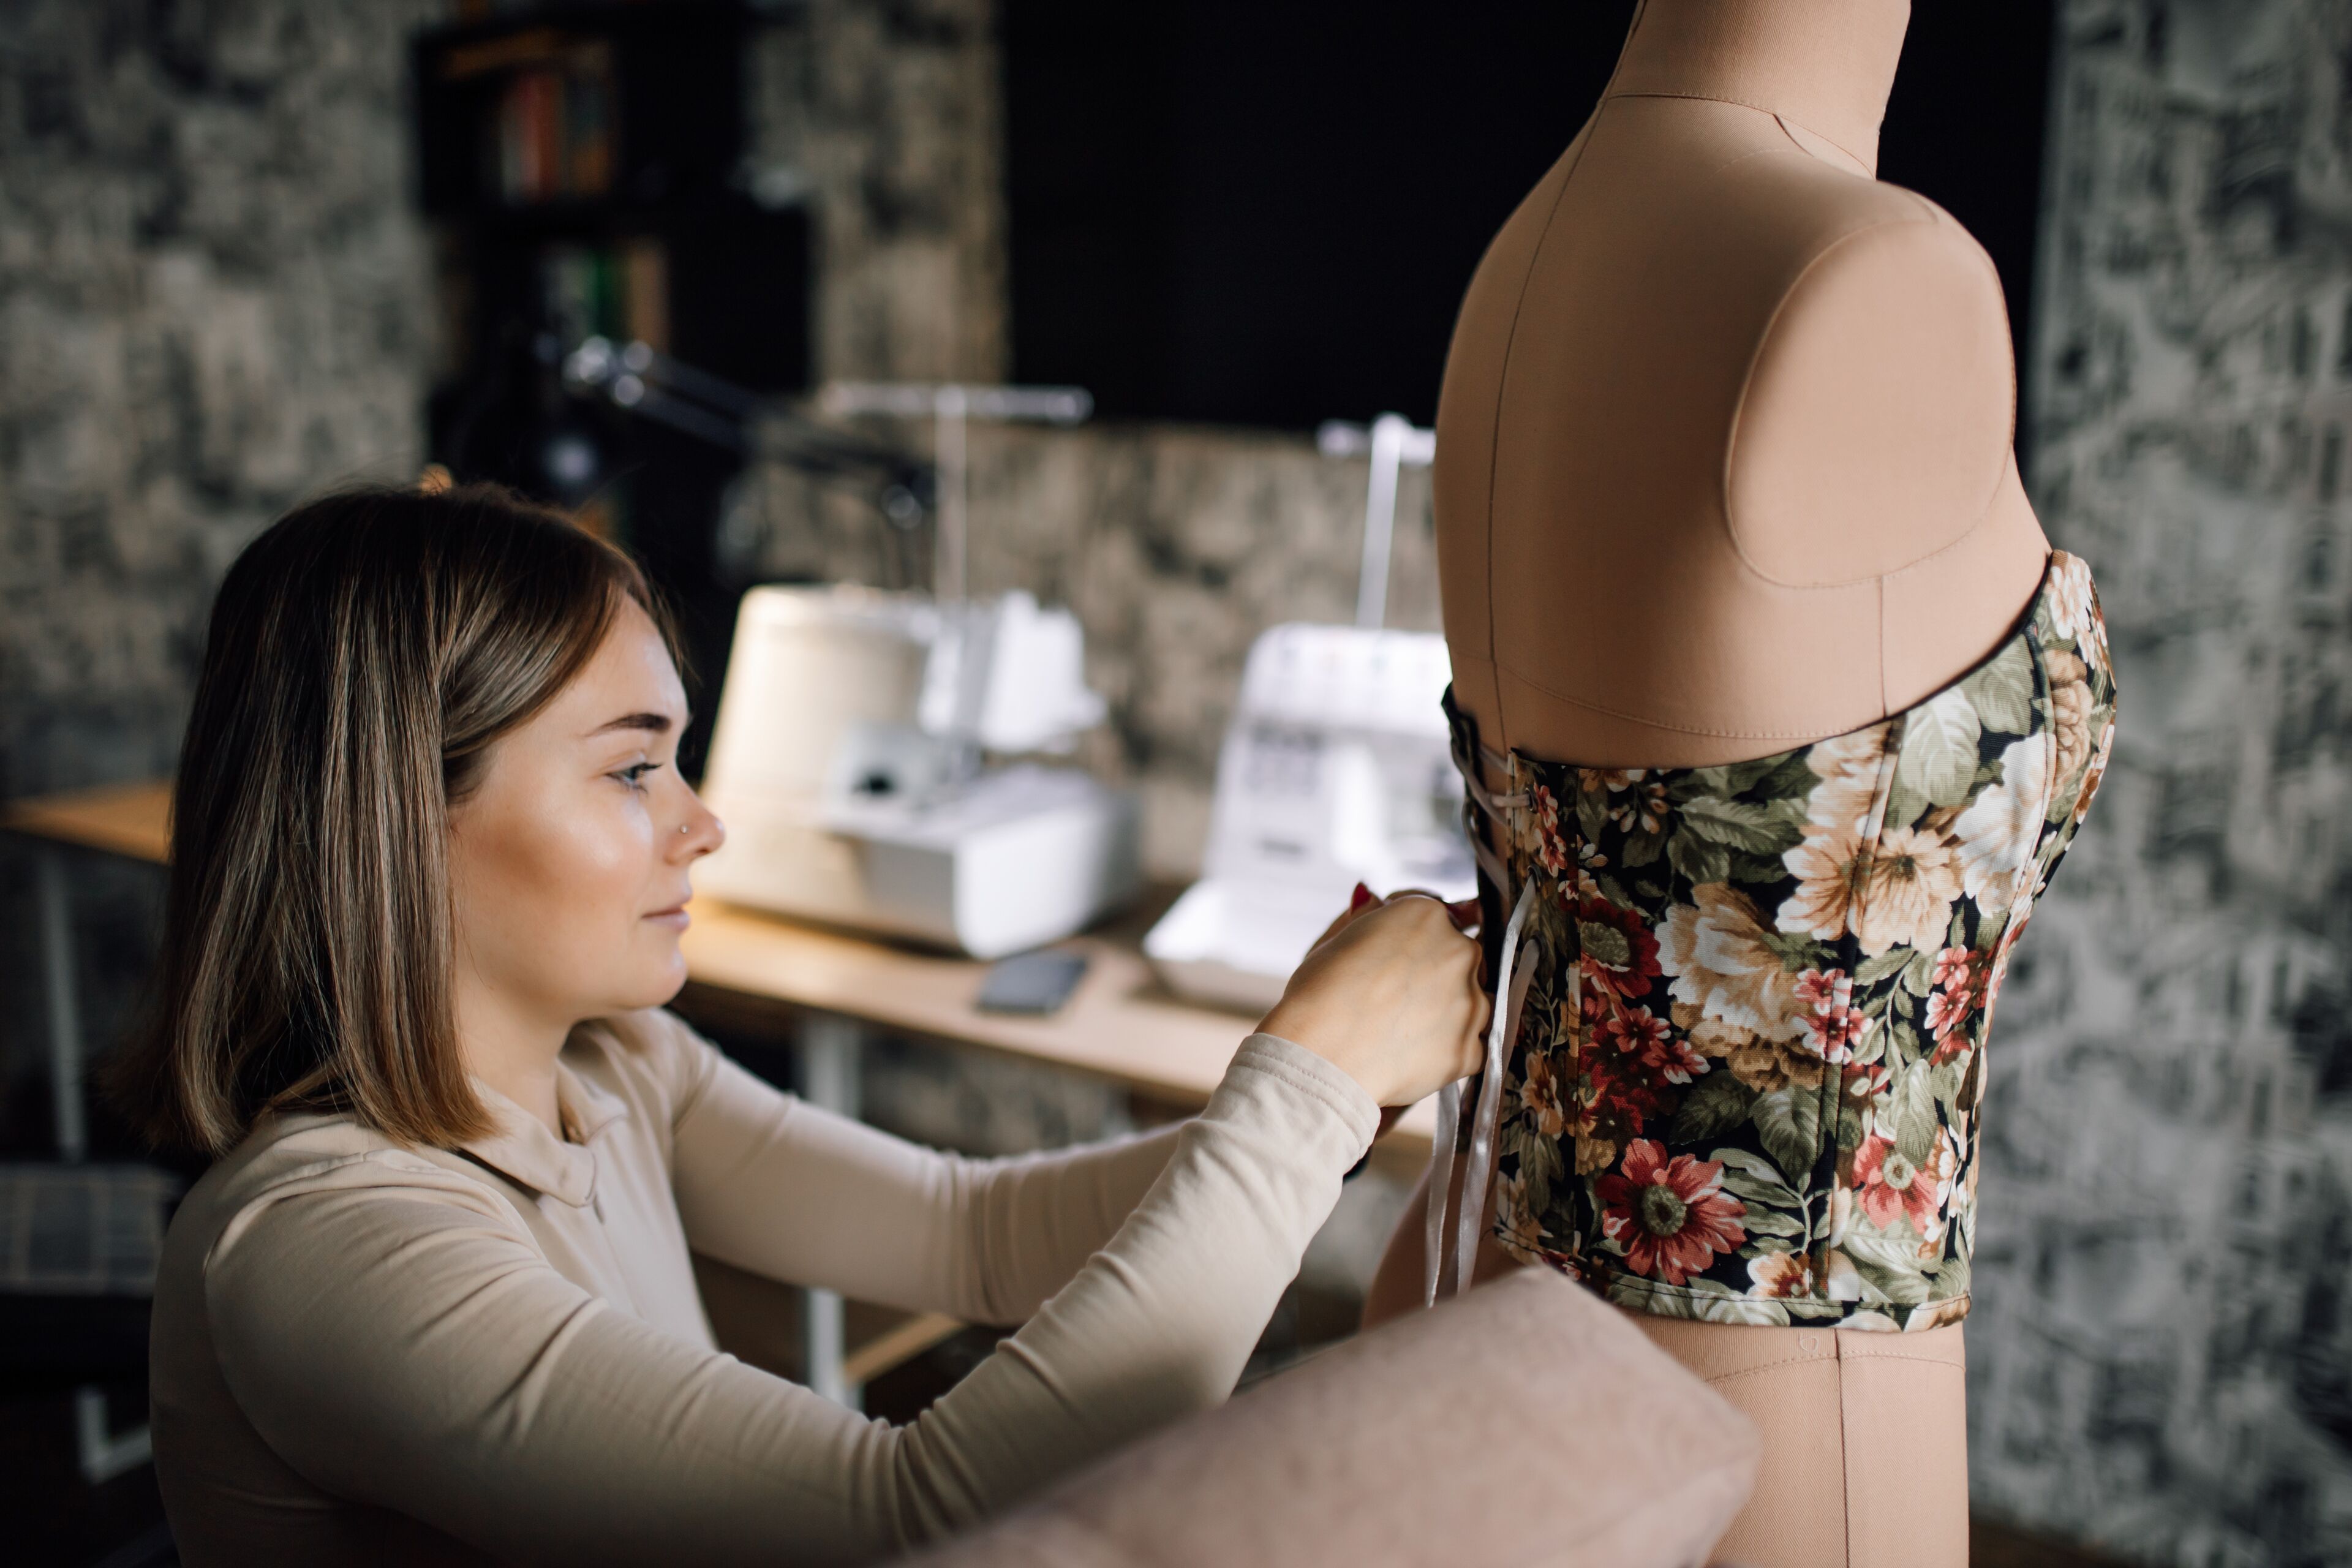 A woman tailors a floral dress on a mannequin in a design studio, suggesting meticulous handcrafting.